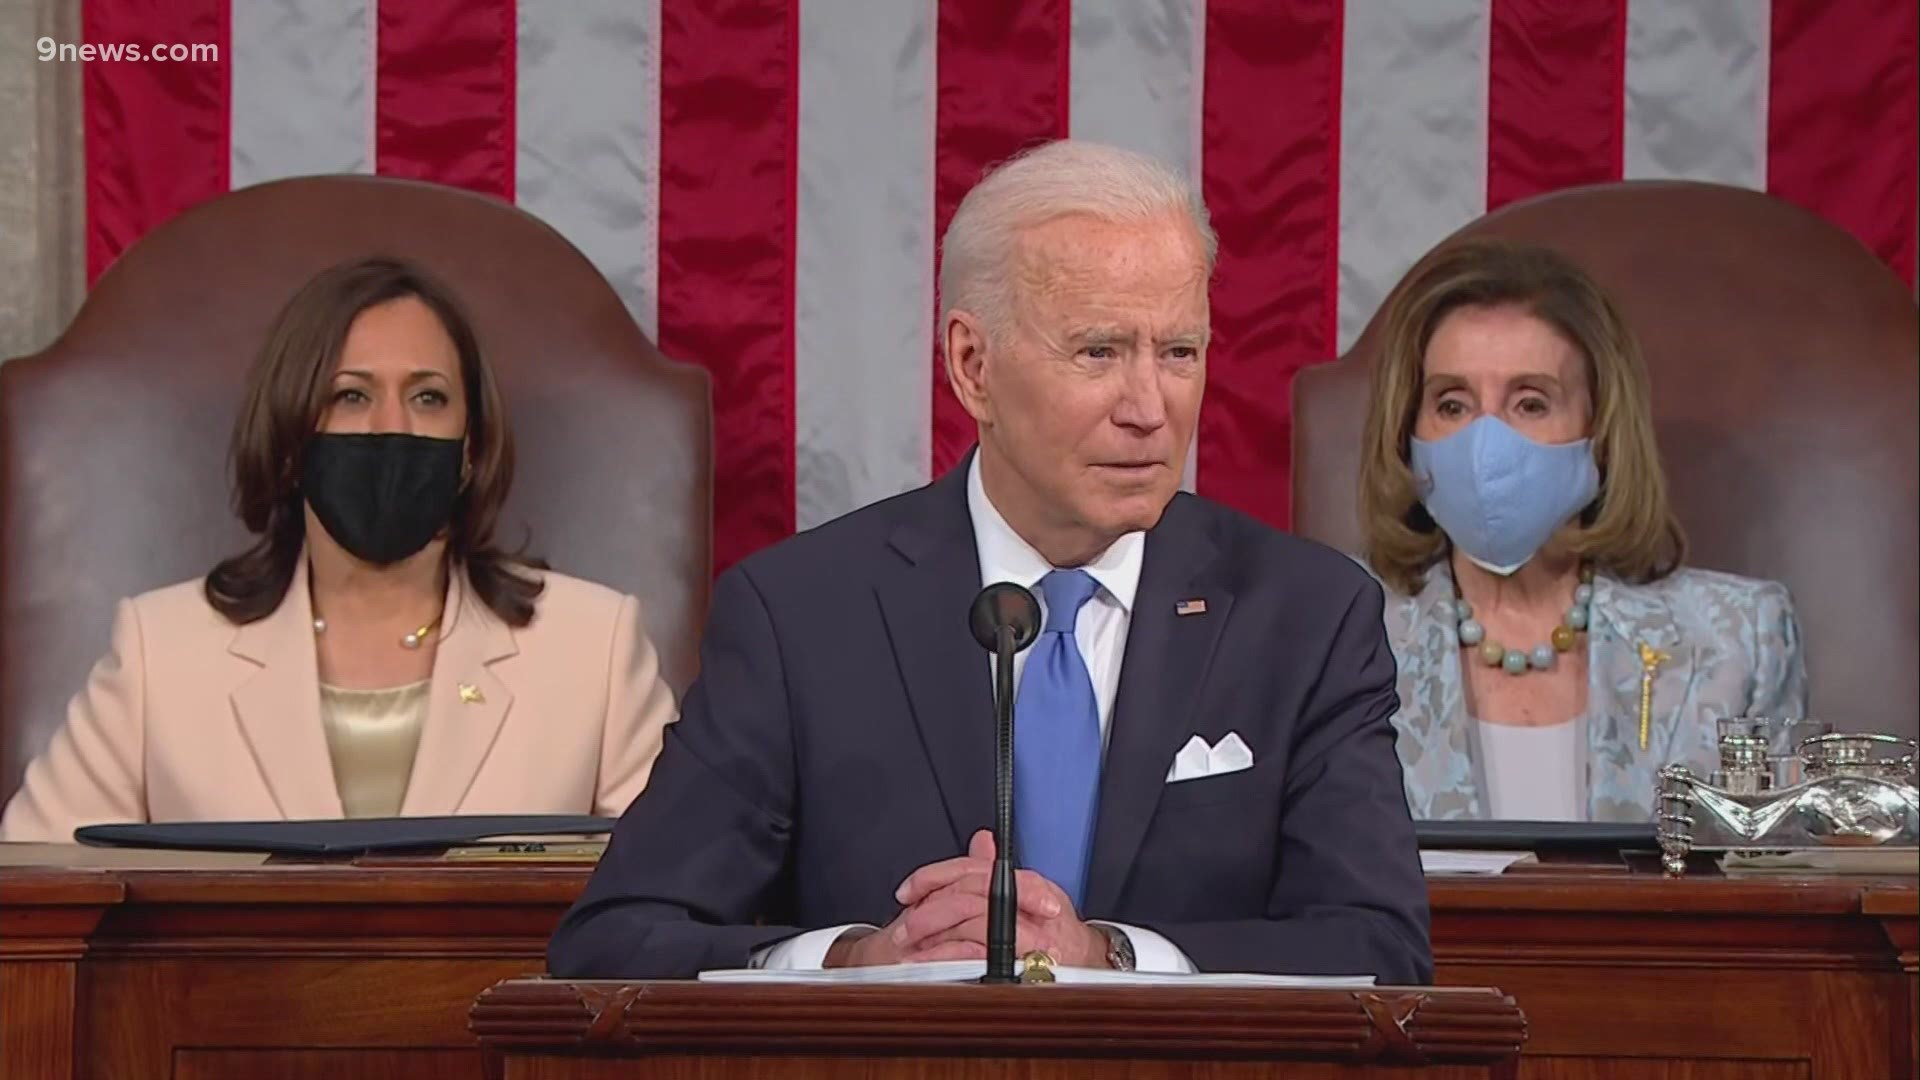 Biden has used his first address before a joint session of Congress to make the case that his administration has made progress during his first 100 days in office.